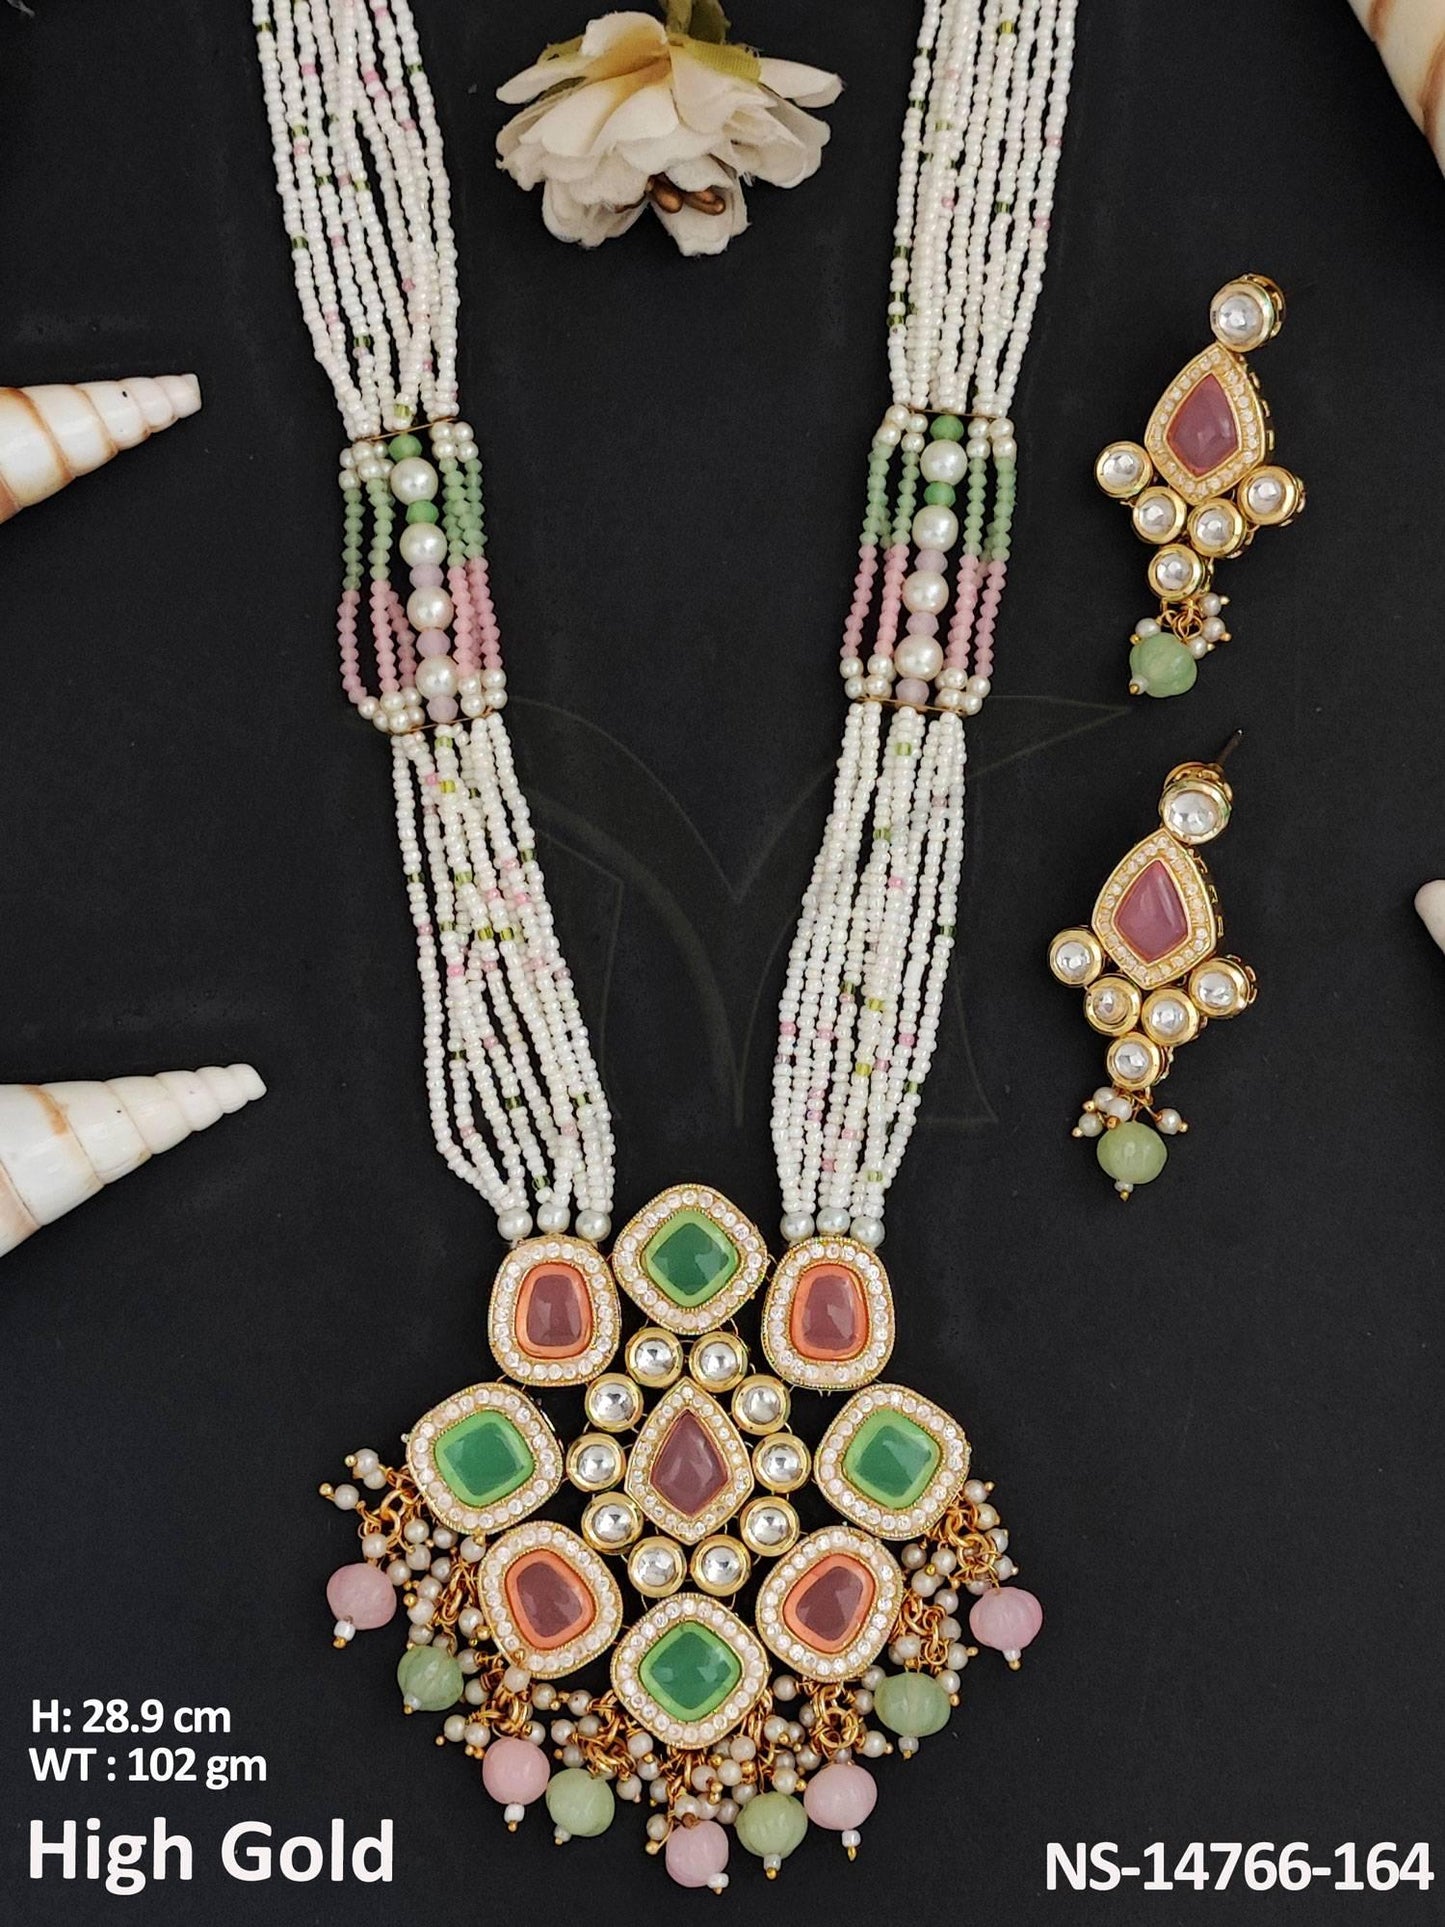 This Kundan Jewellery set features a fancy long necklace with high gold polish, crafted from brass metal.